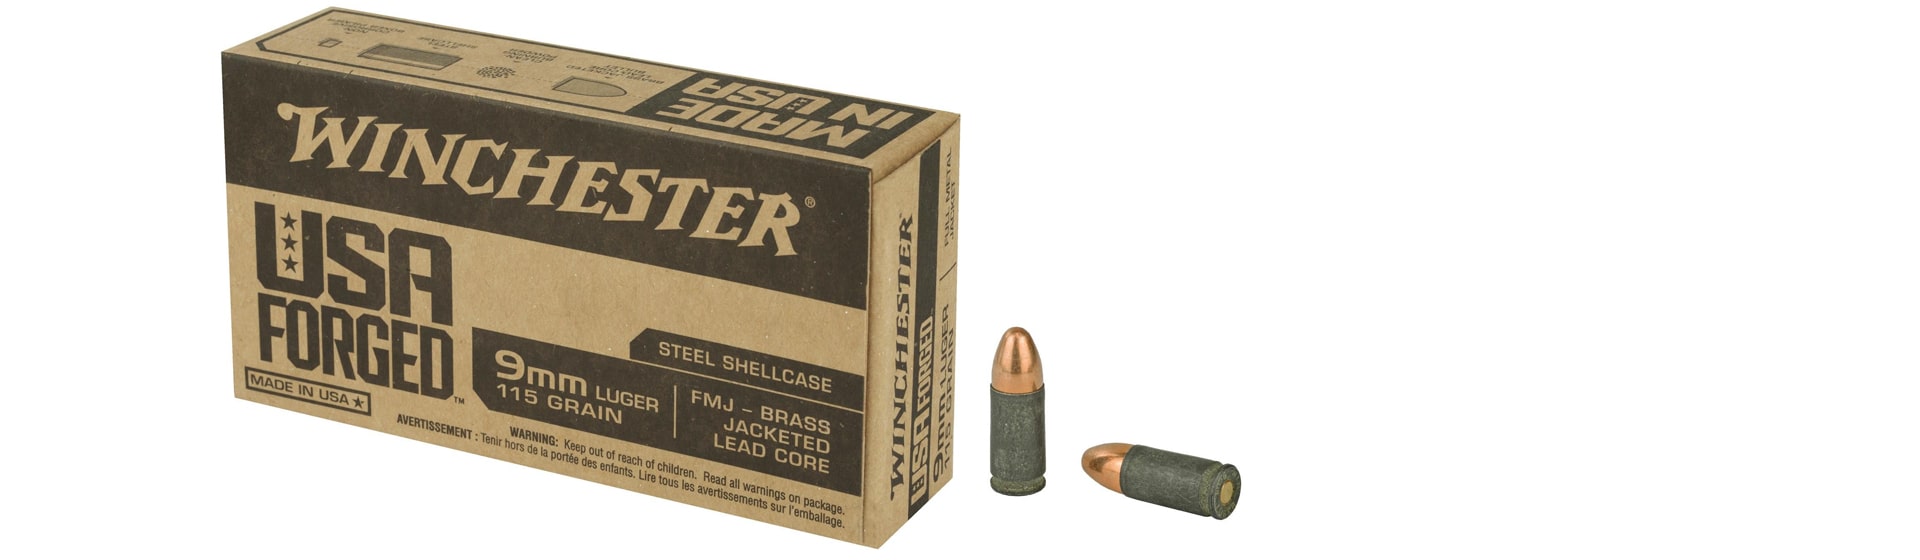 Winchester Steel-cased 9mm Ammo